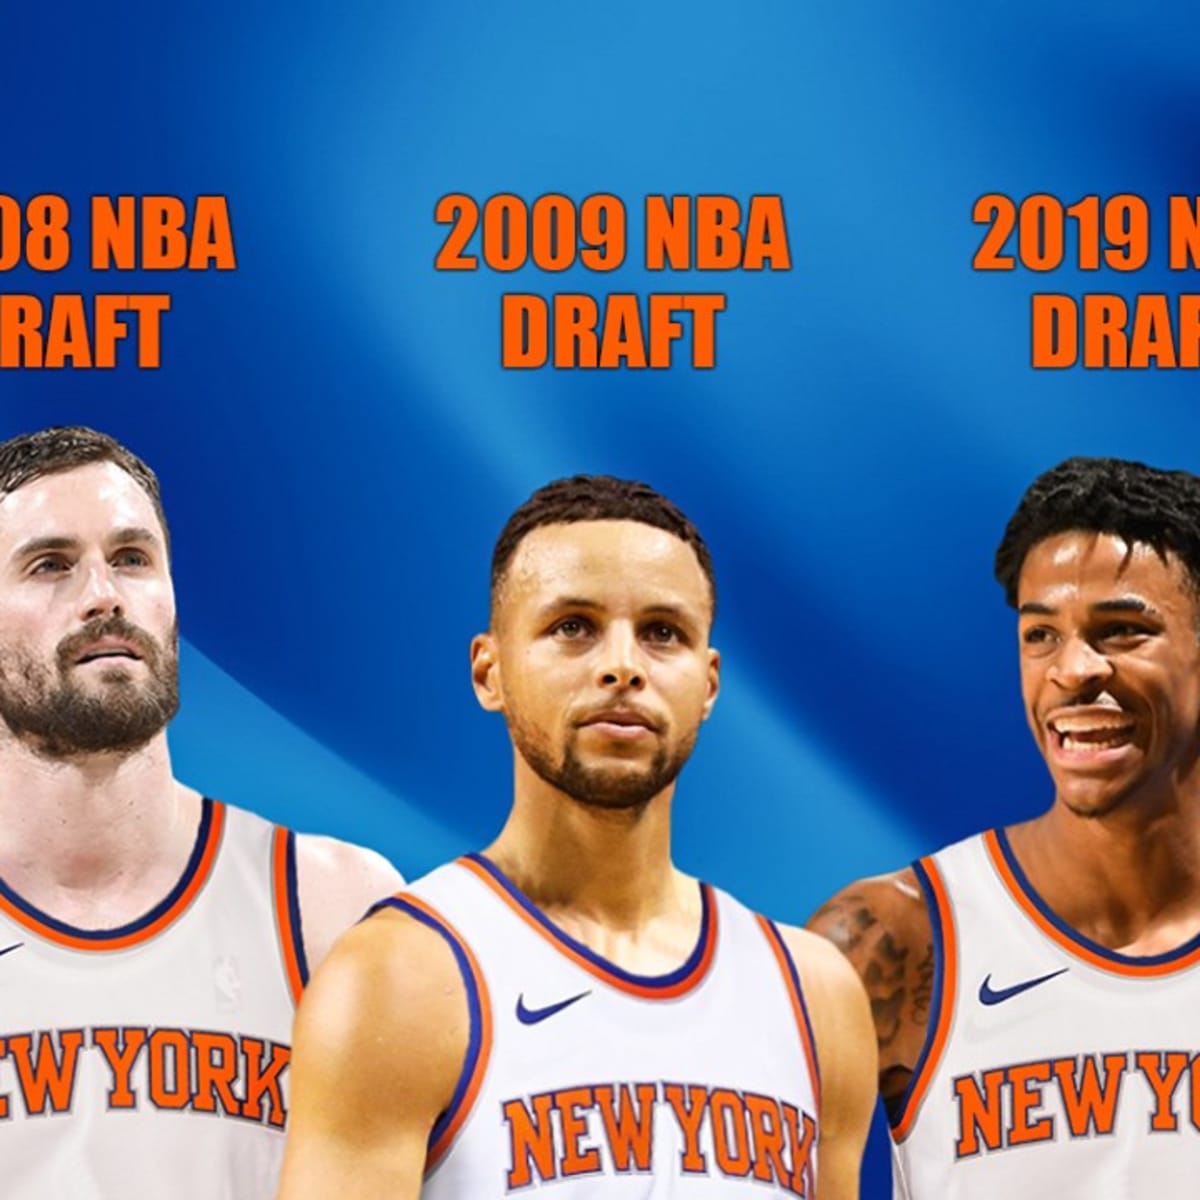 With the 8th Pick in the 2017 NBA Draft, the New York Knicks